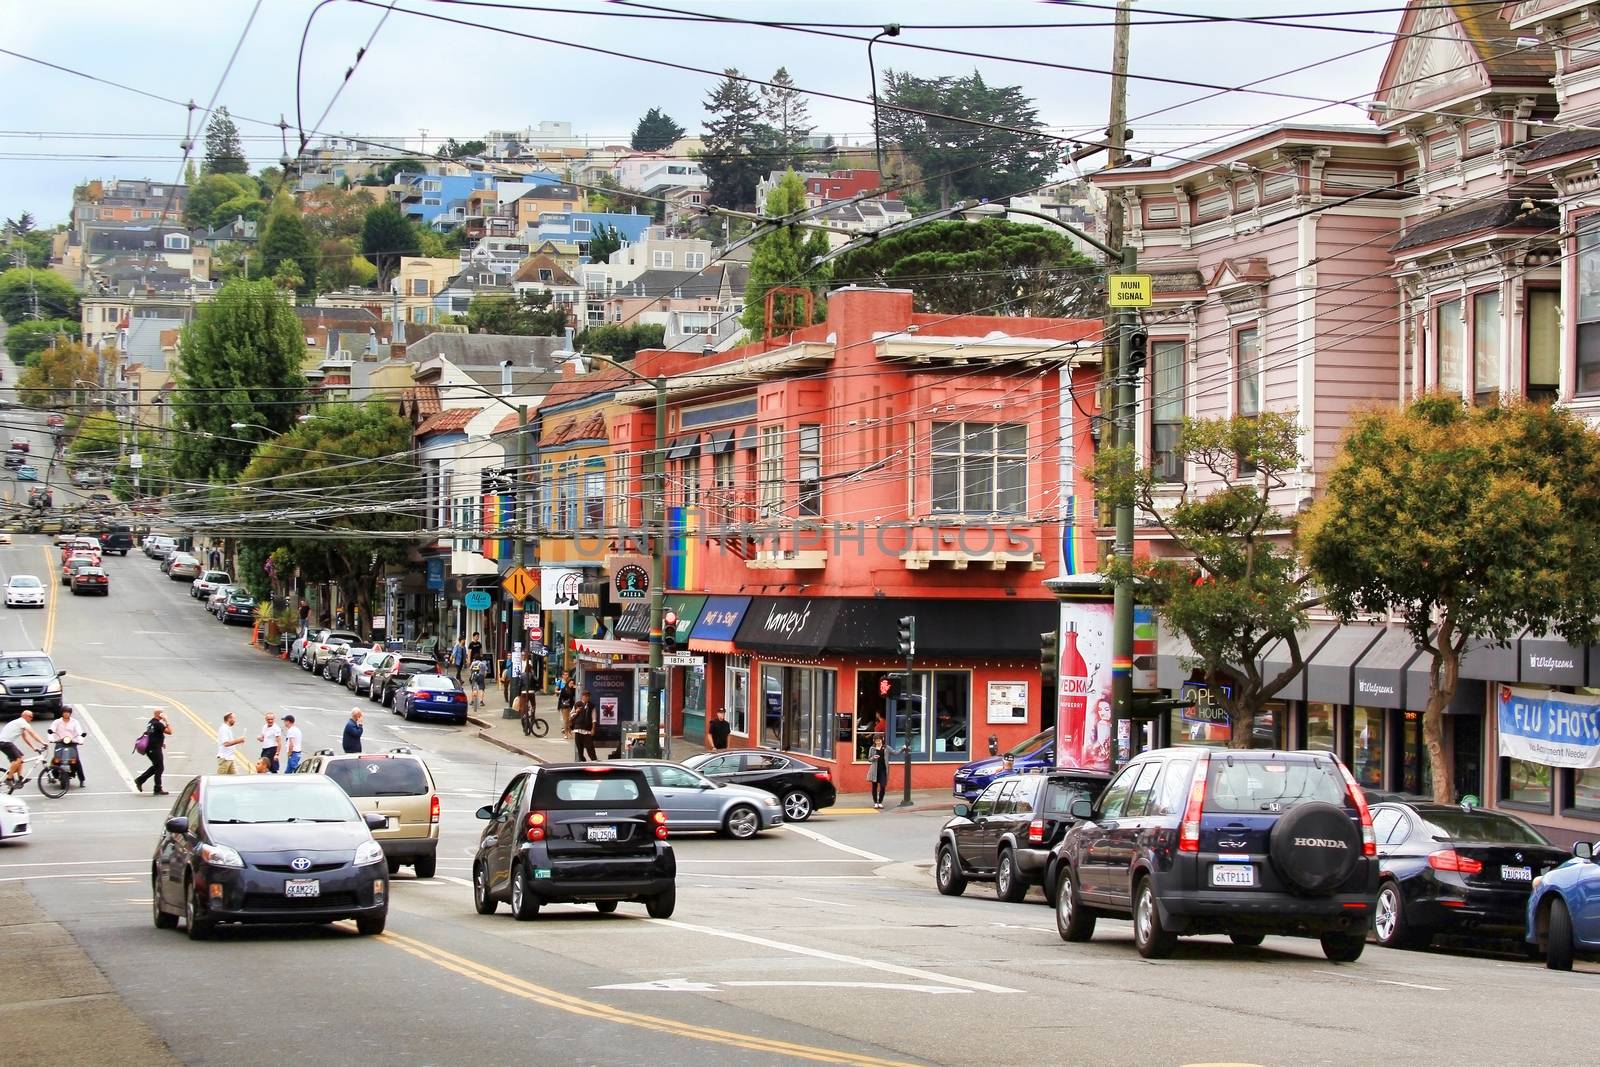 Castro district in San Francisco by friday